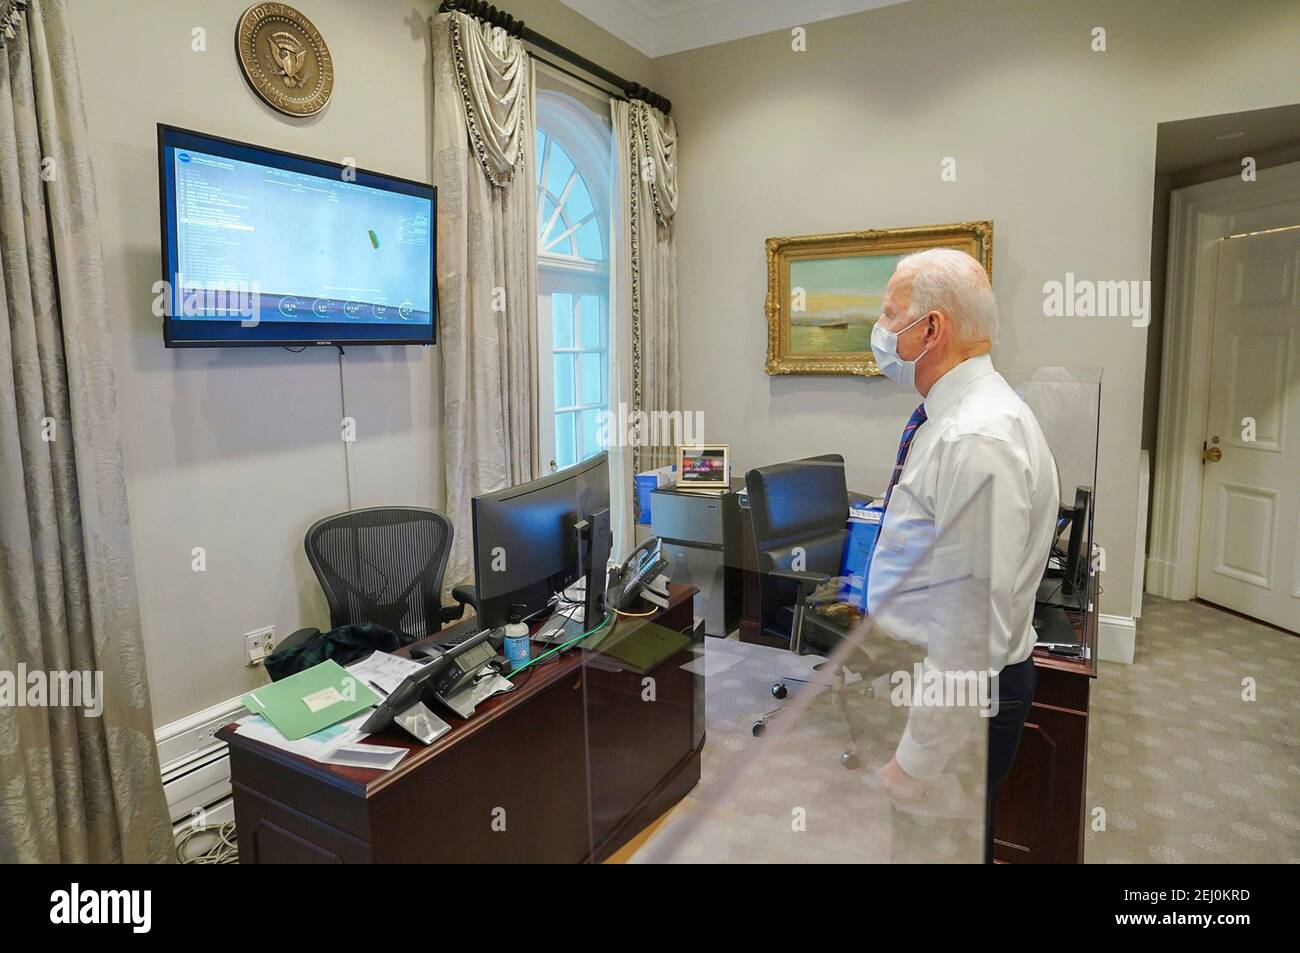 U.S President Joe Biden watches the broadcast of the NASA Perseverance Mars rover landing on the surface of the Red Planet from the outer Oval Office of the White House February 18, 2021 in Washington, D.C. Stock Photo